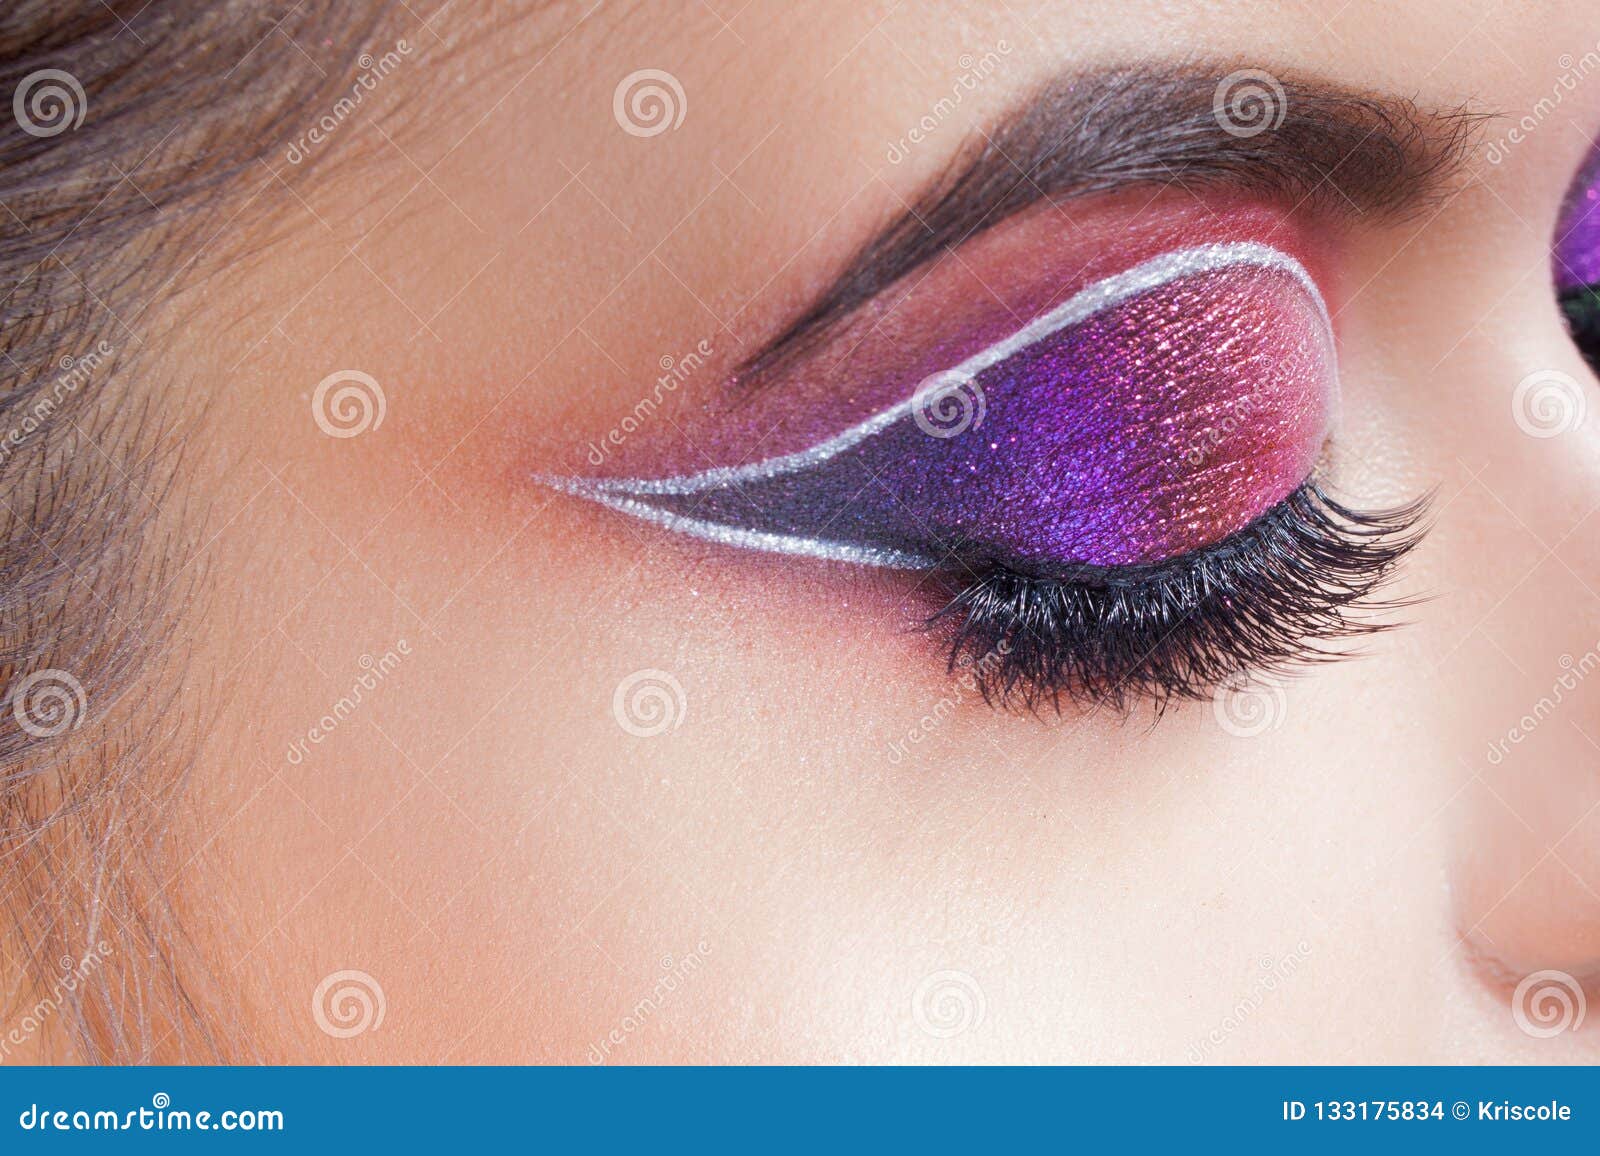 Amazing Bright Eye Makeup. Eye Shadow with a Purple Tint and an White Arrow Stock Photo Image of elegance, girl: 133175834